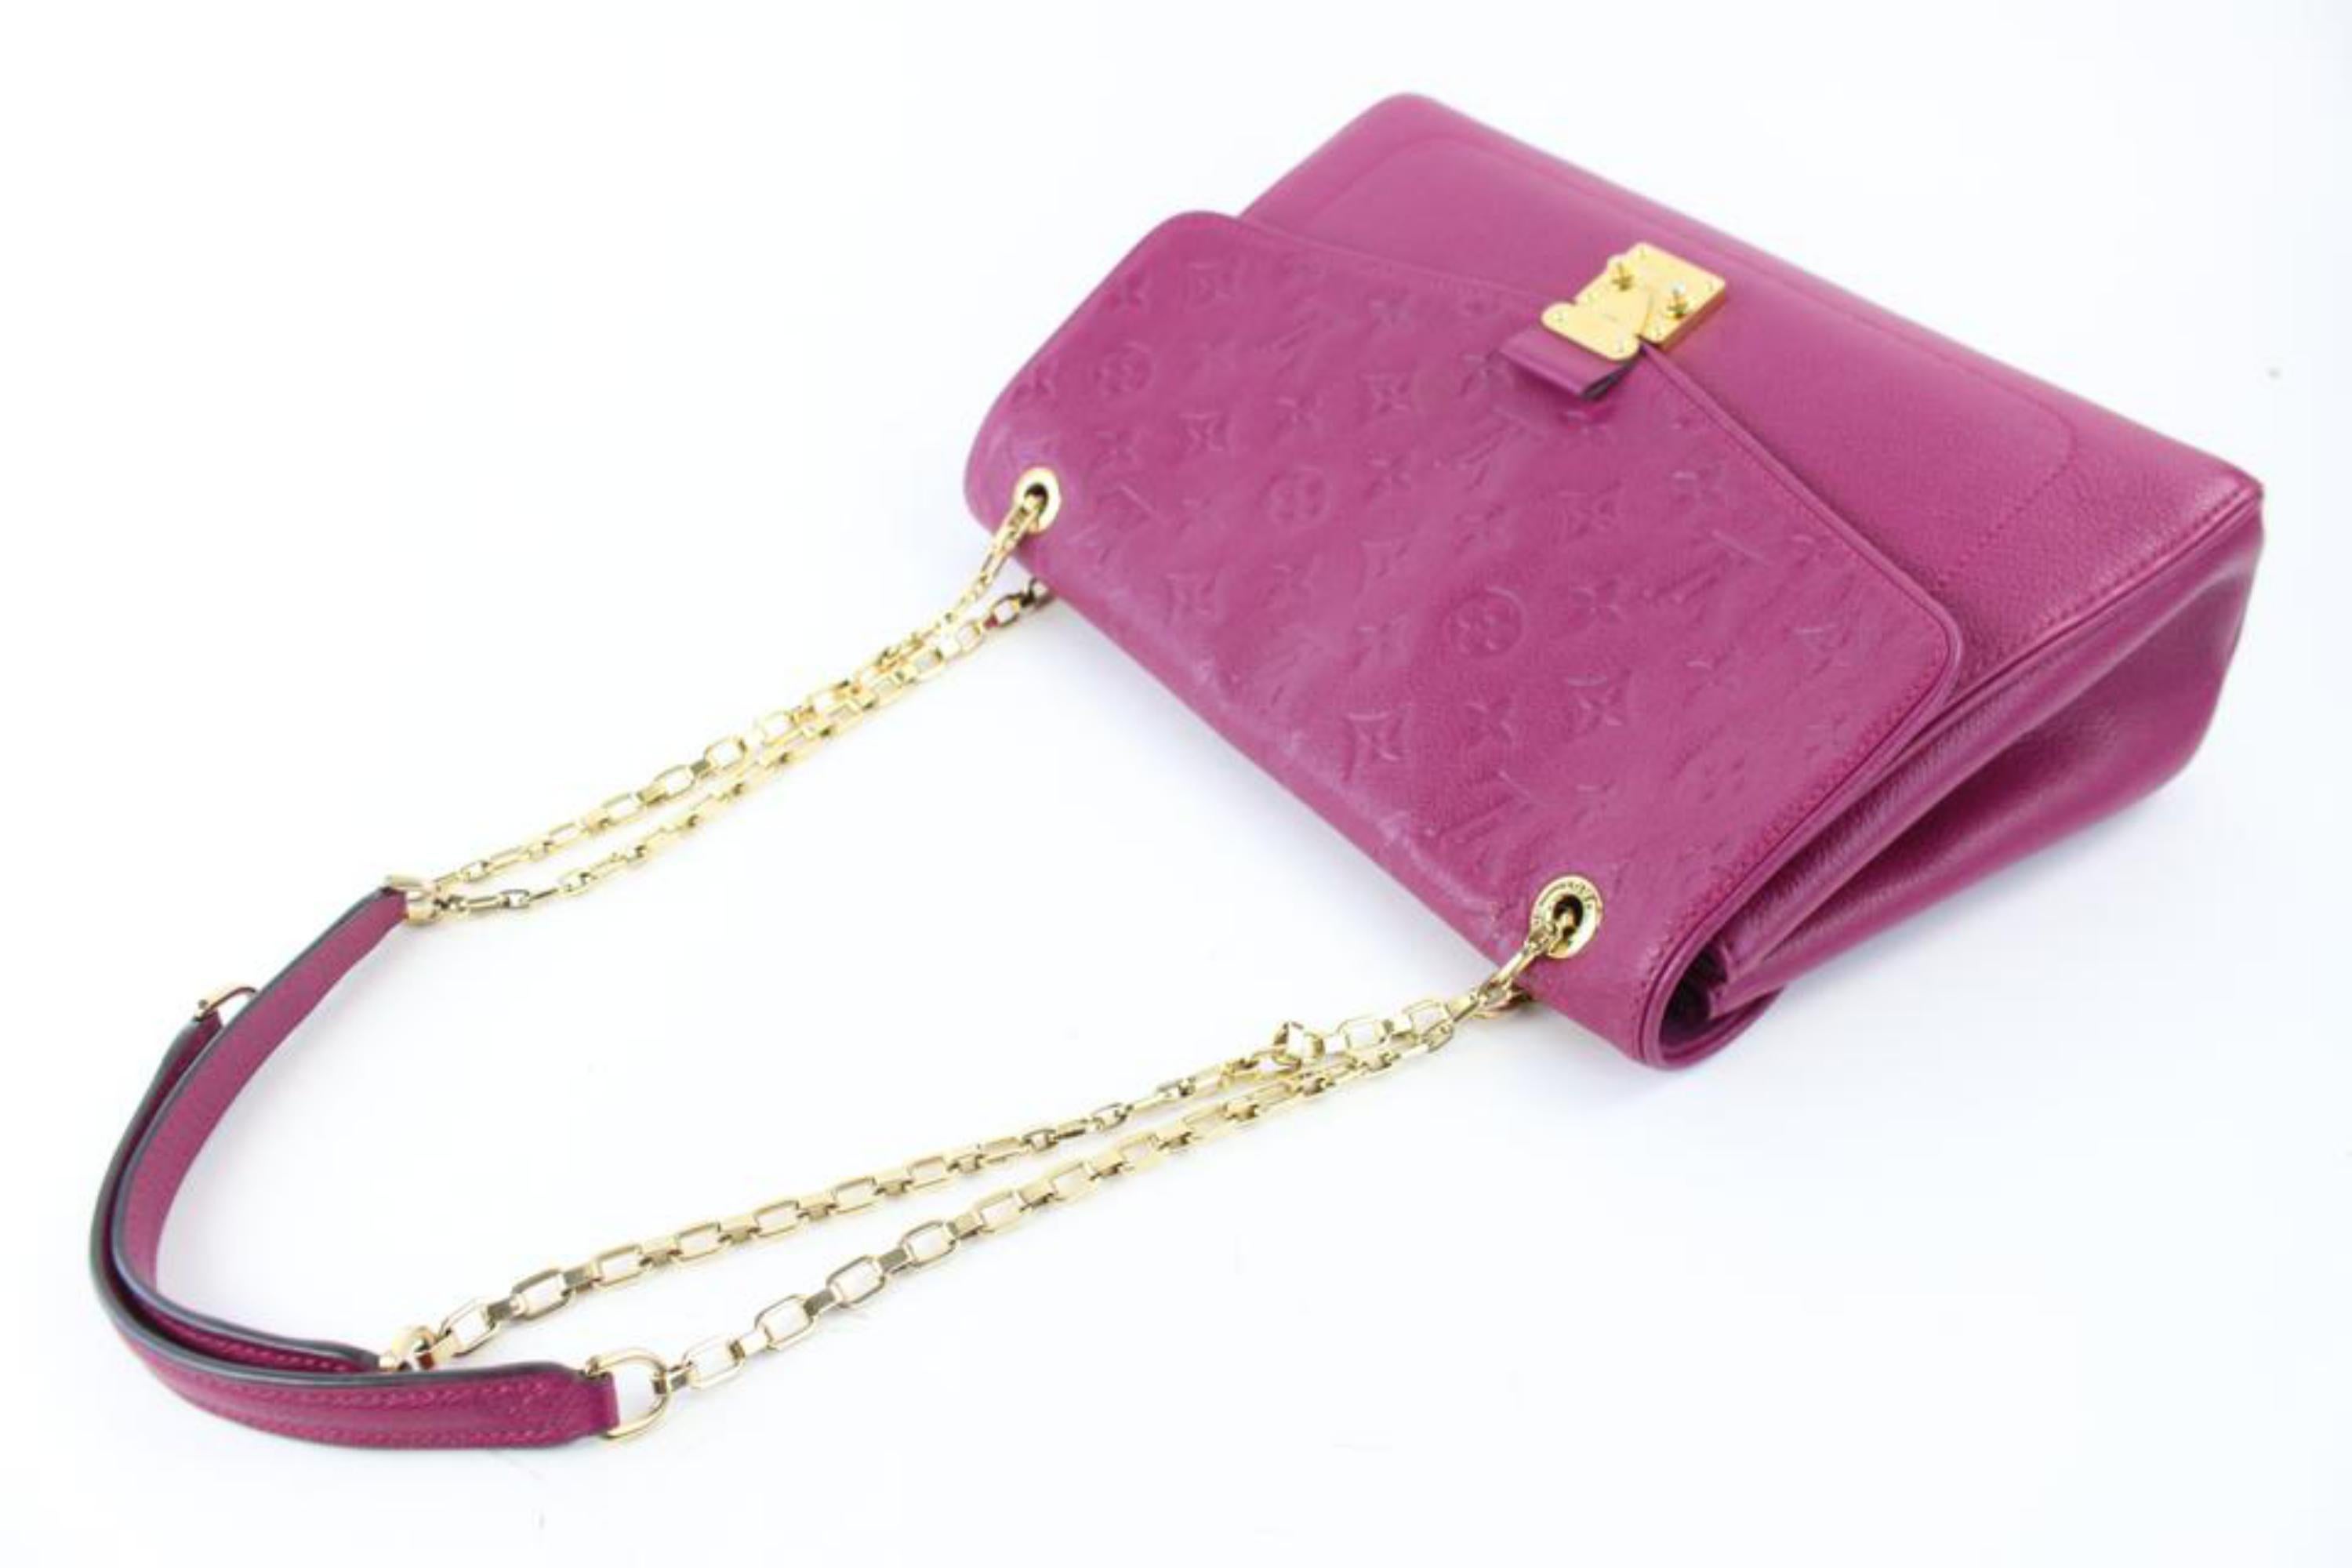 Louis Vuitton Saint Germain 07lz0720 Fuchsia Empreinte Leather Cross Body Bag In Excellent Condition For Sale In Forest Hills, NY